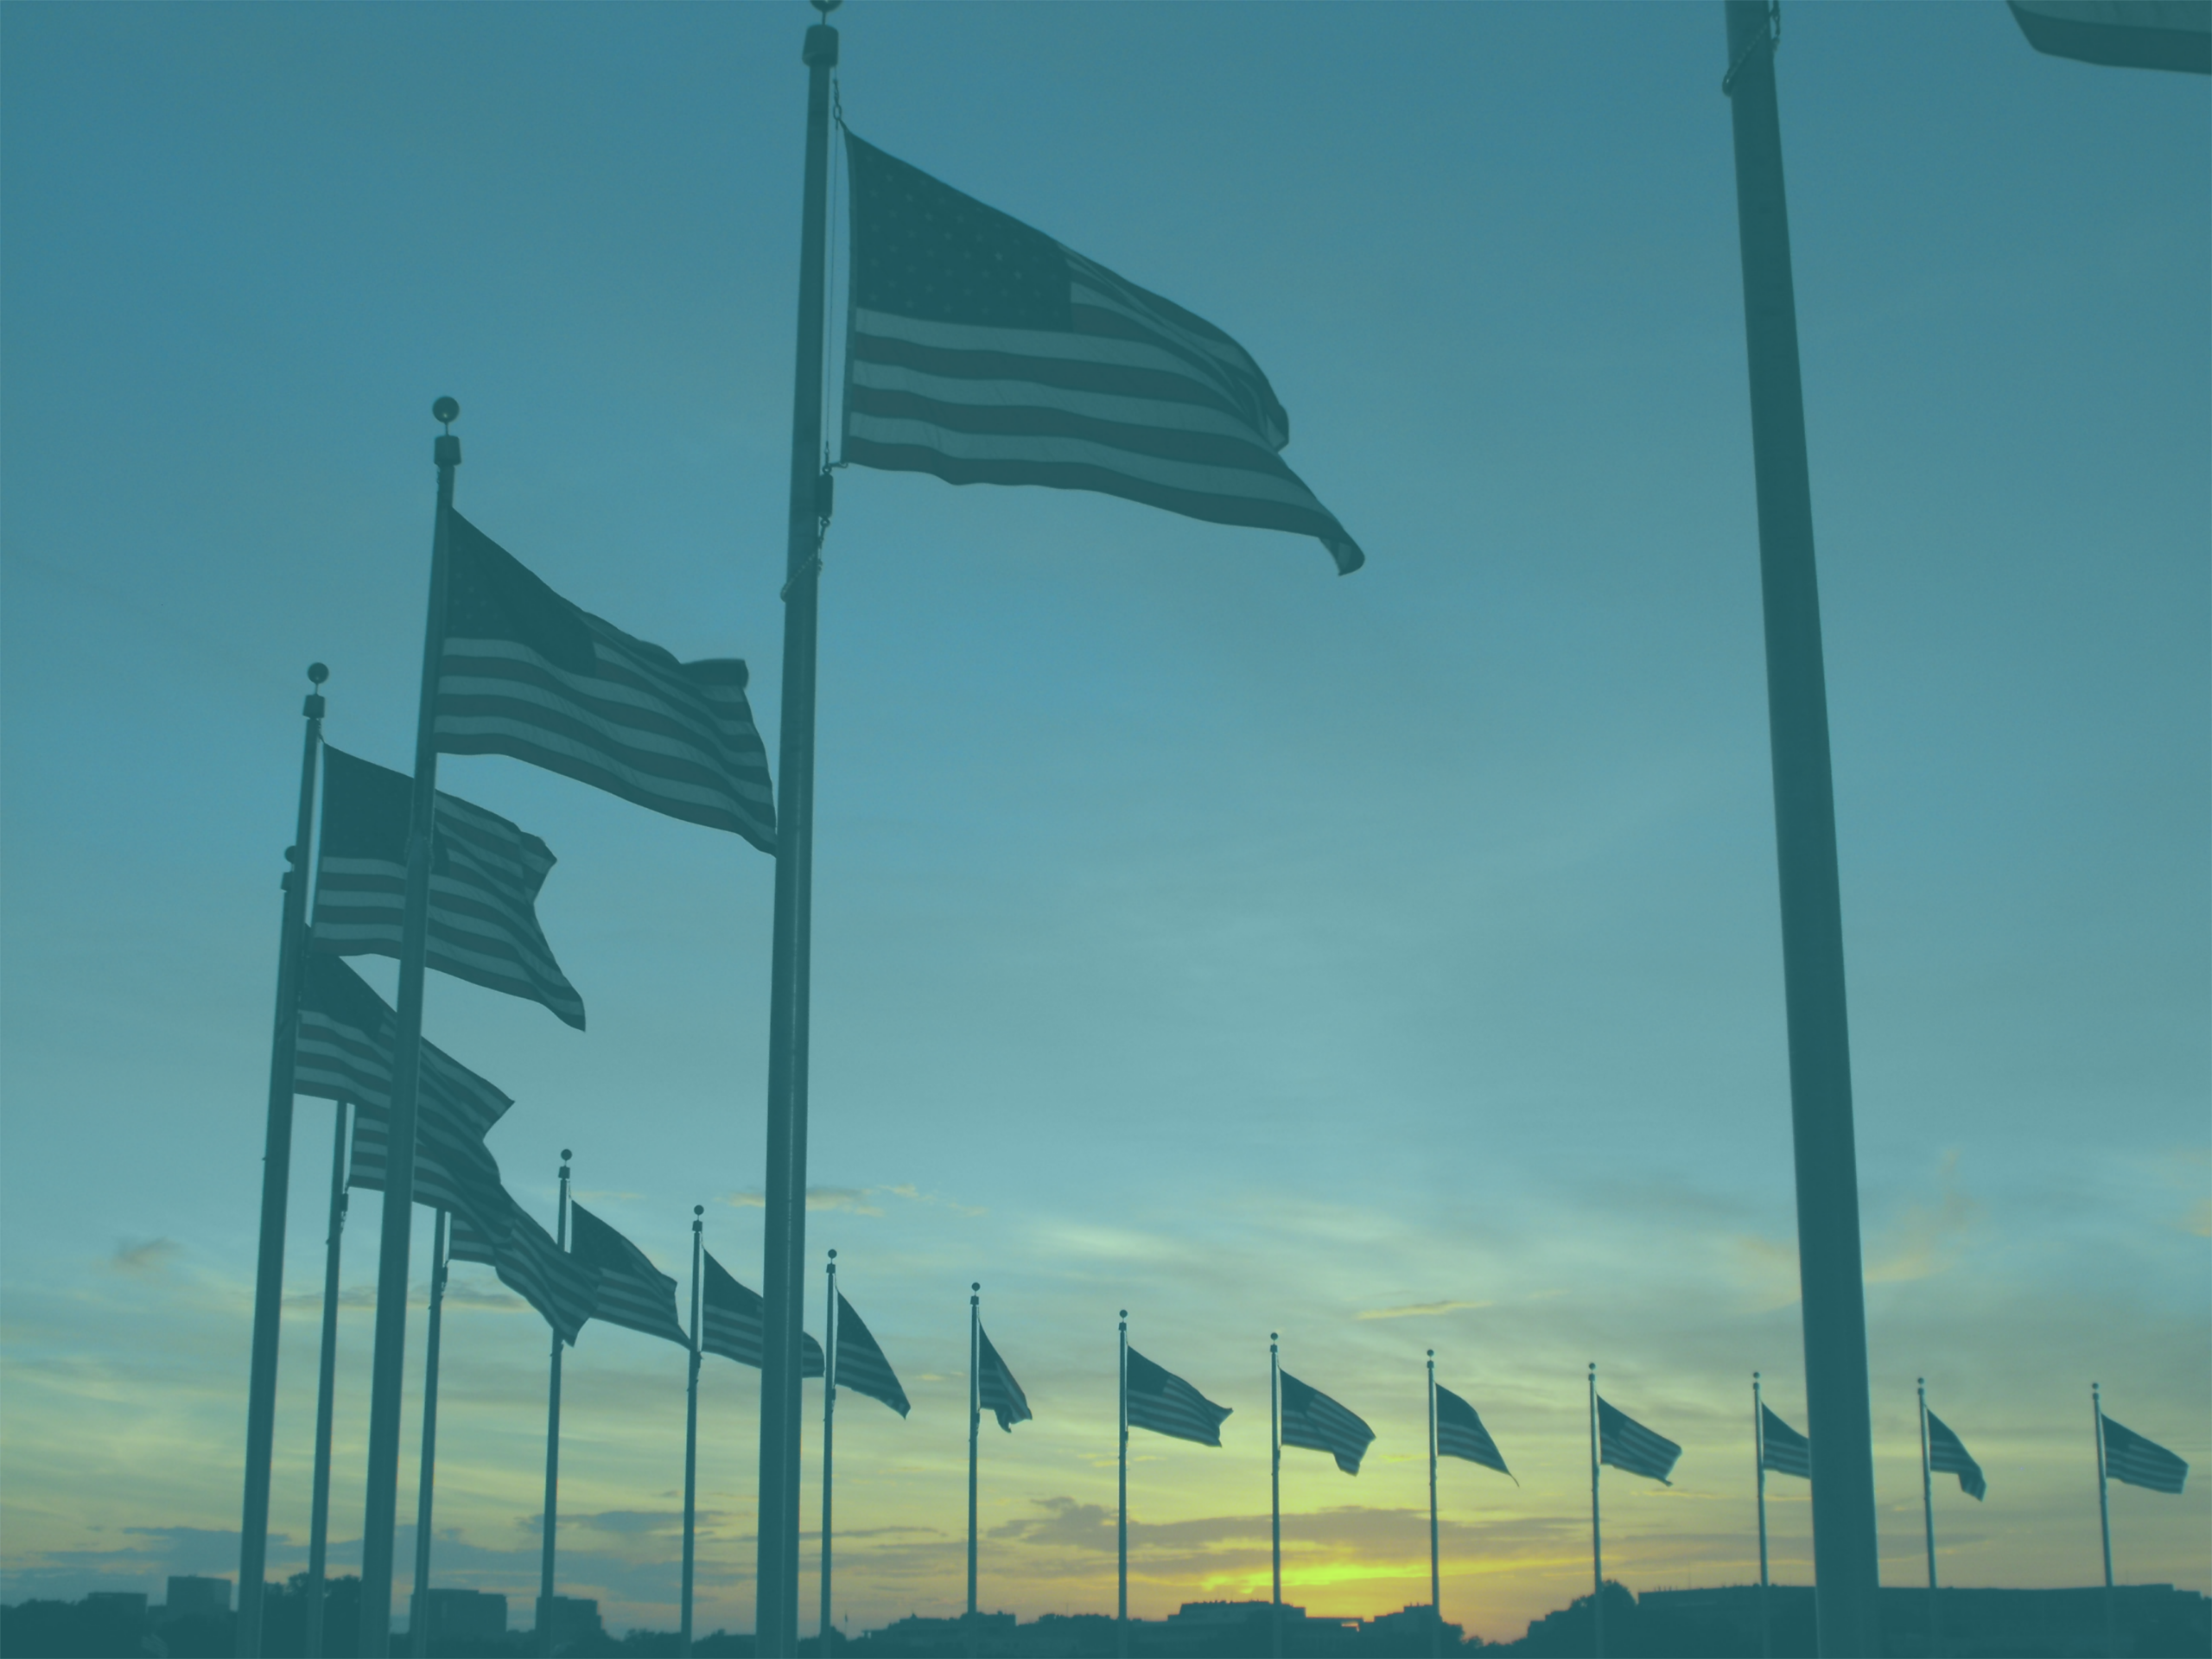 Photo: "Flags around monument at sunset", by Mommy110710, licensed under CC BY-SA 3.0. Hue modified from the original